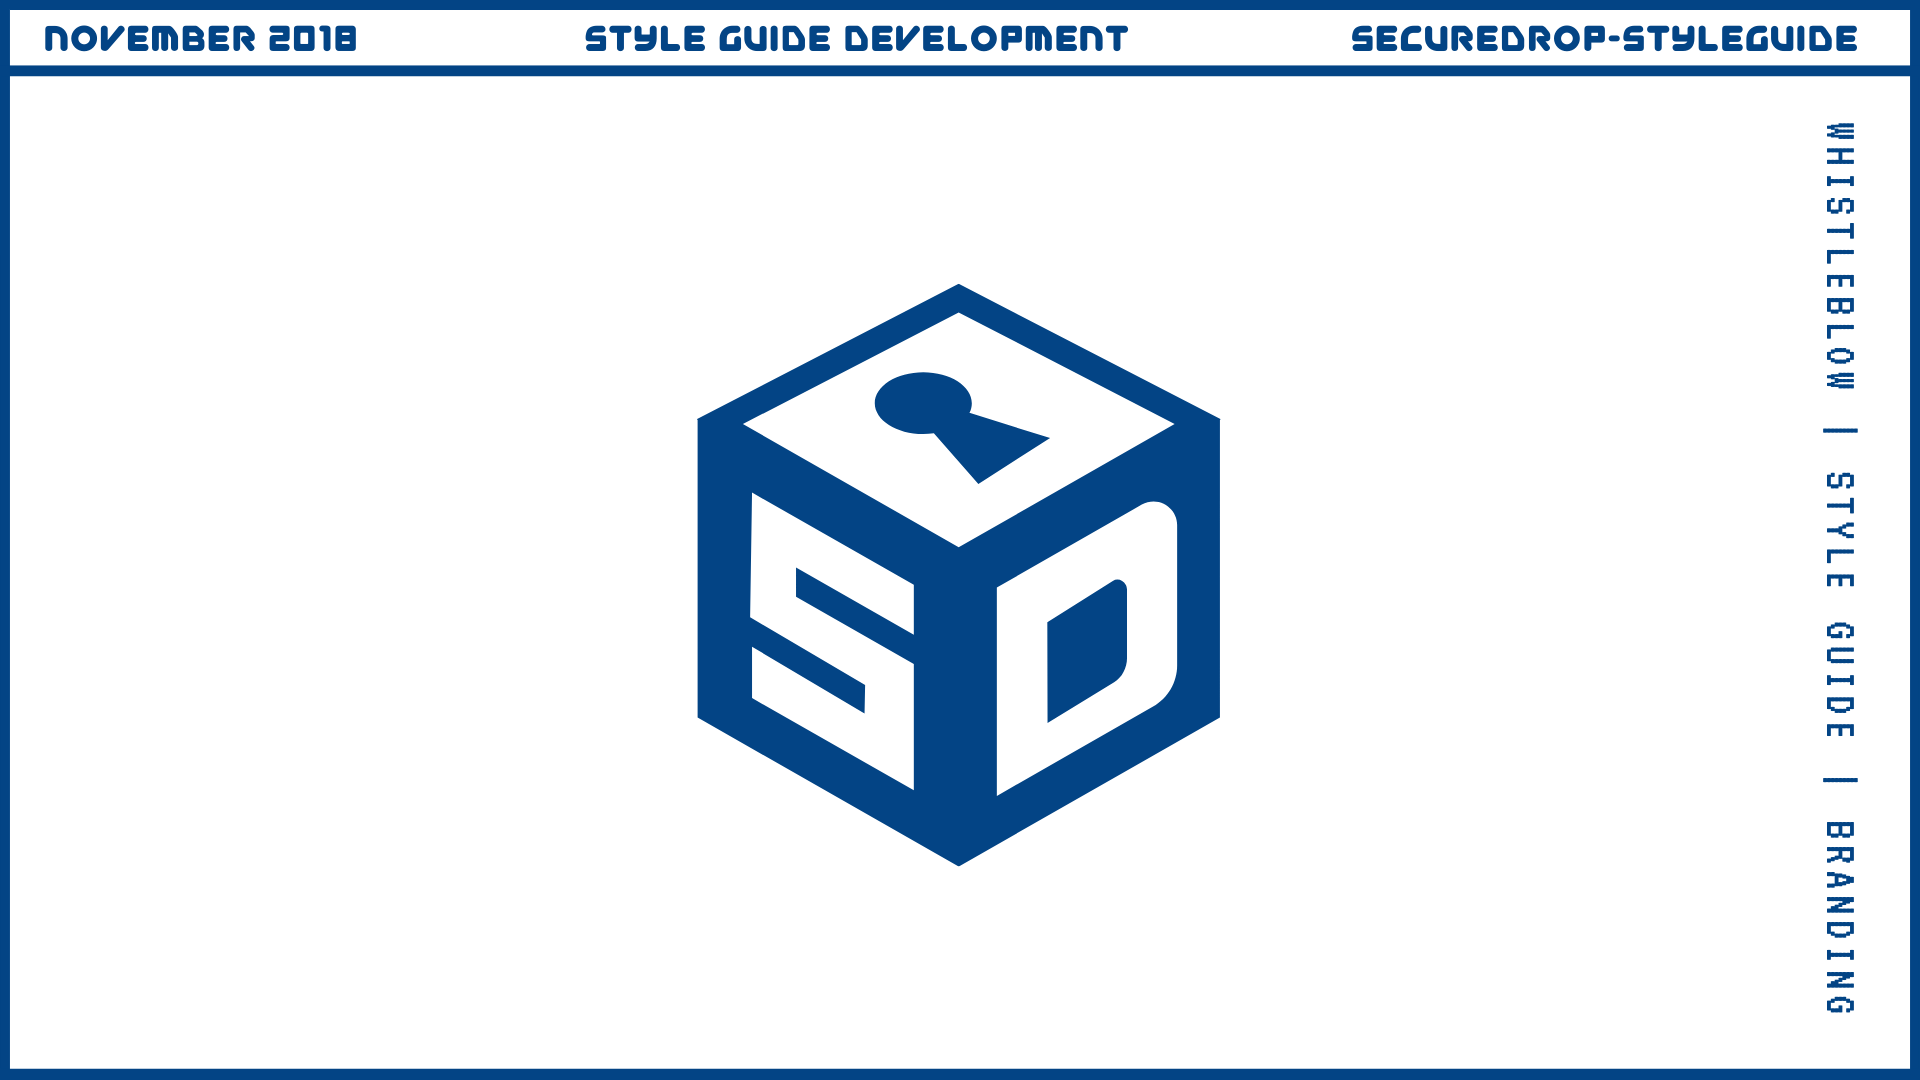 SecureDrop Style Guide